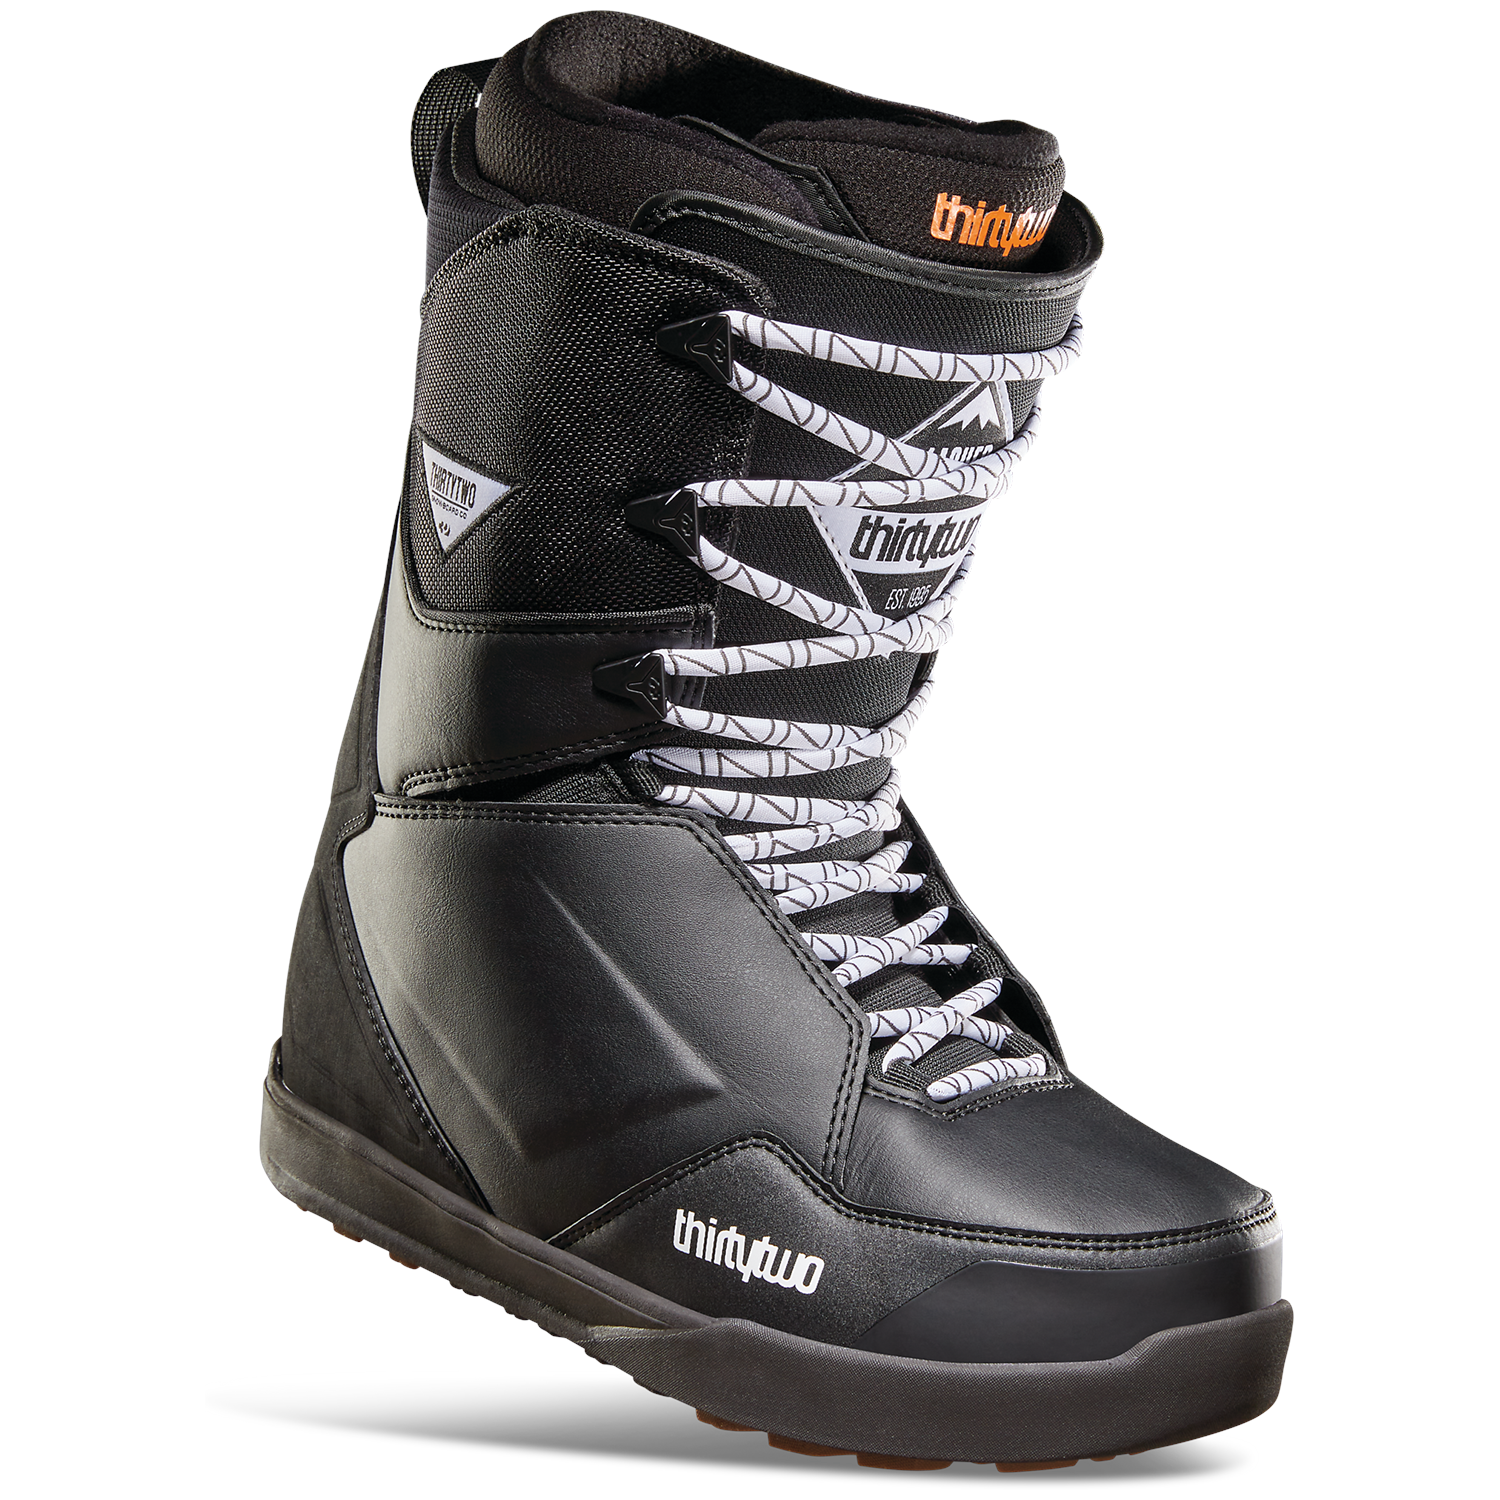 thirtytwo Lashed Snowboard Boots | evo